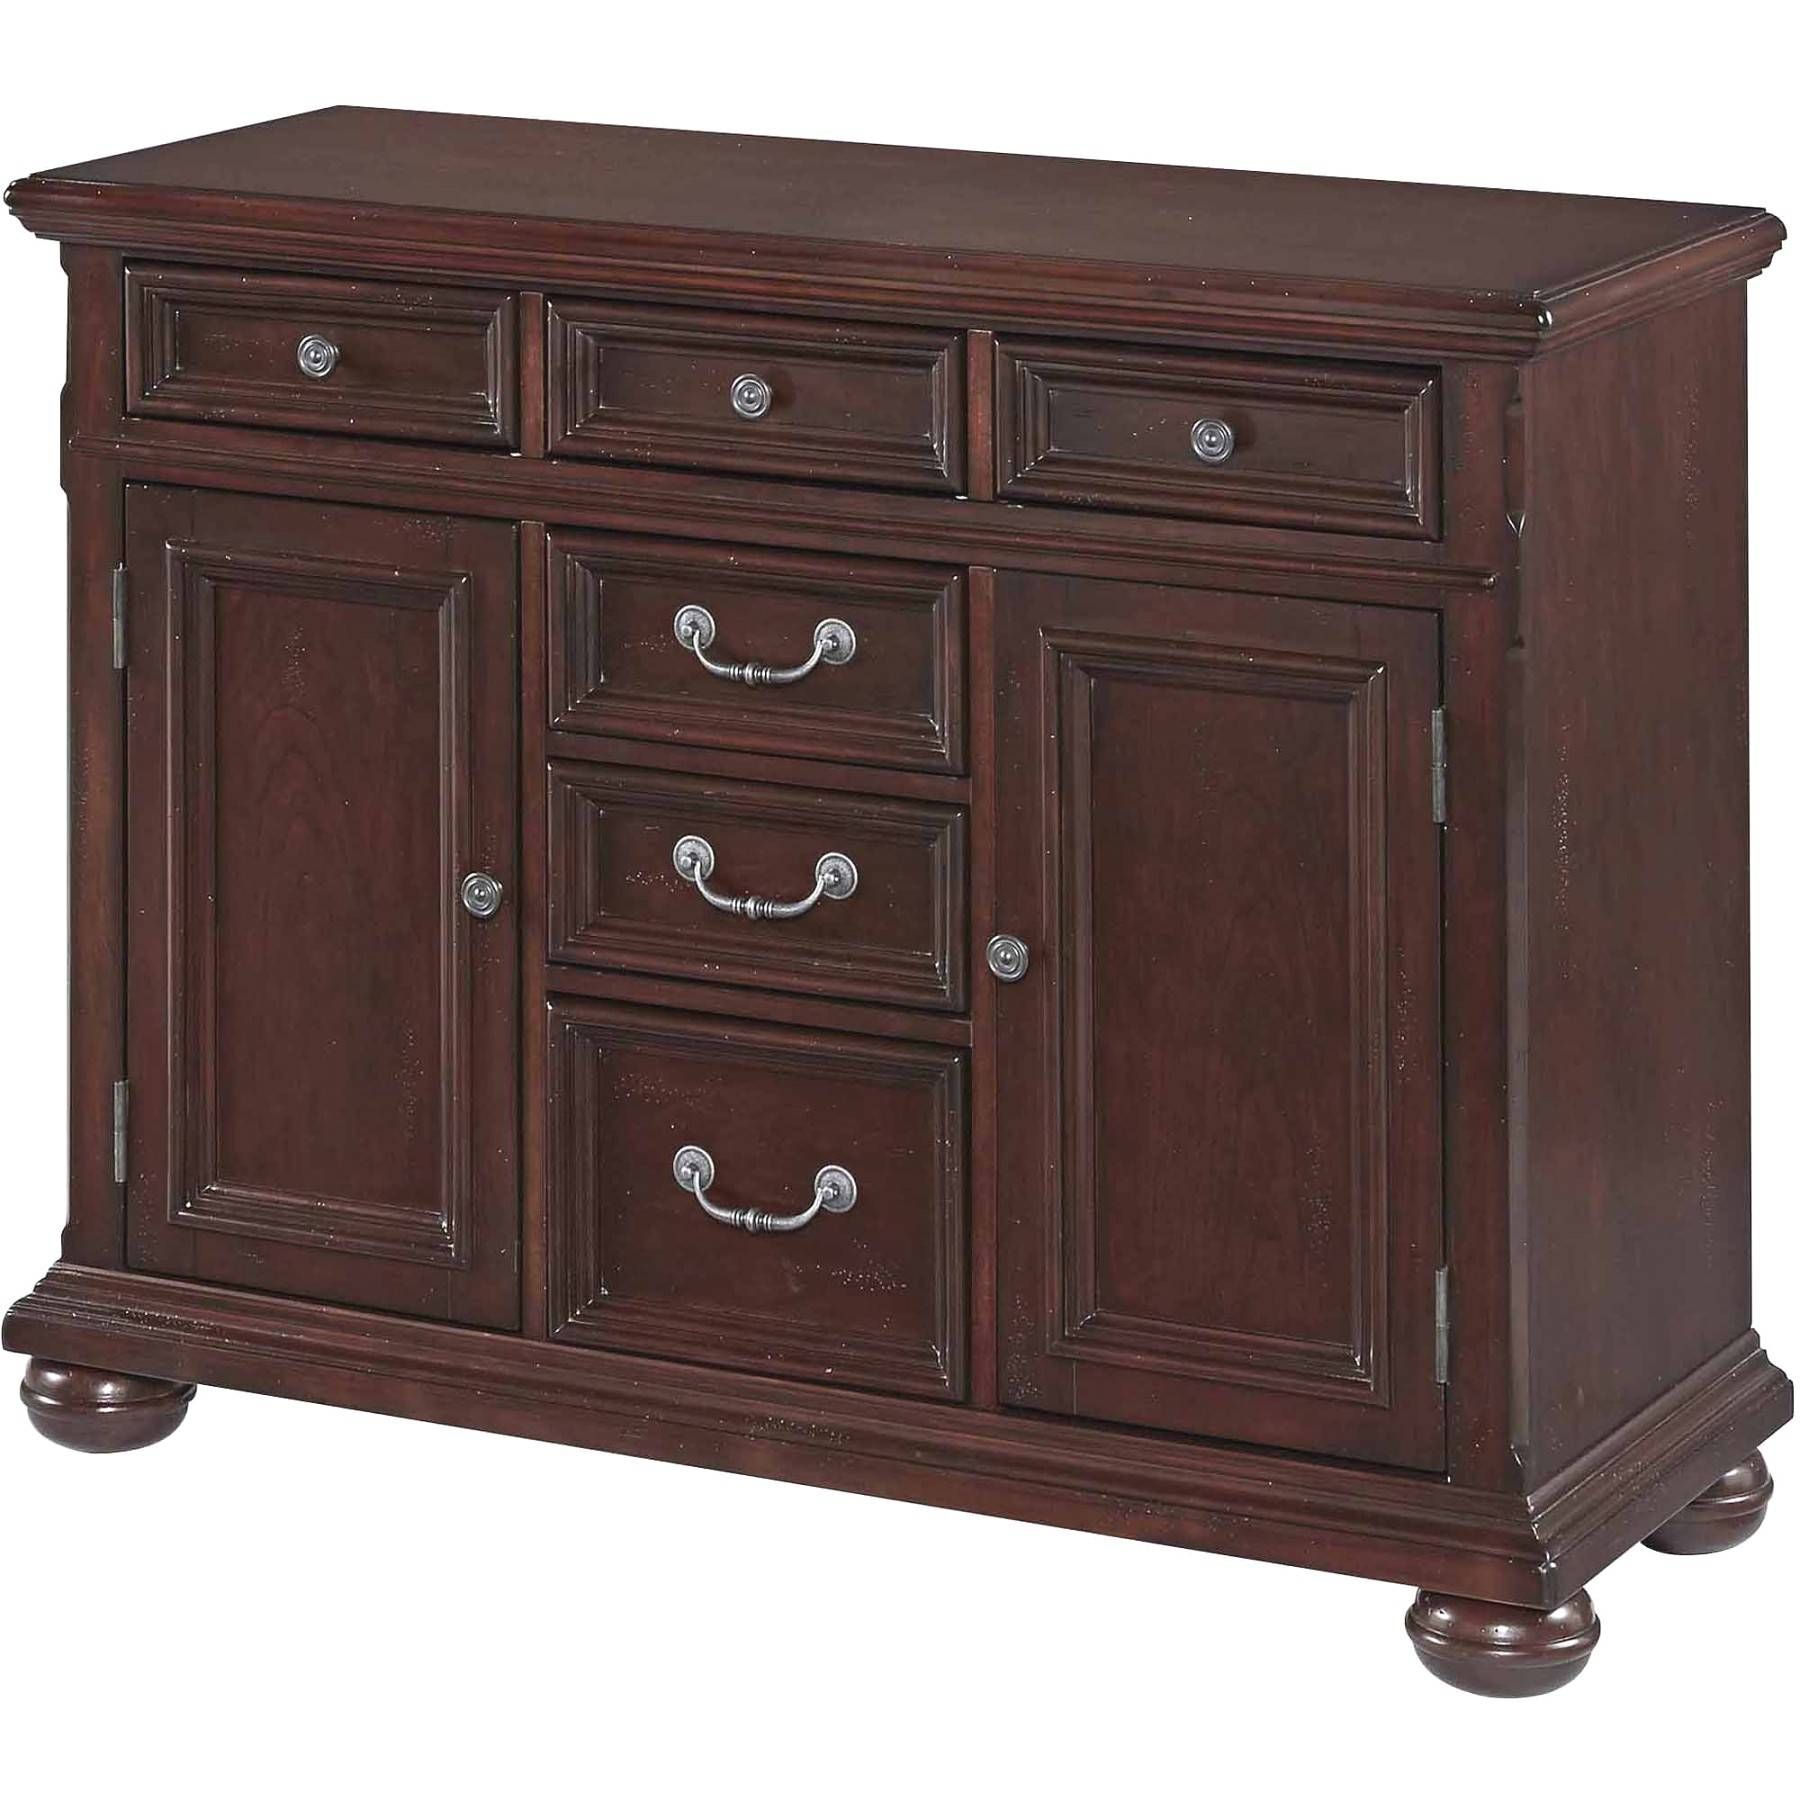 Wooden Sideboards For Sale New Sideboards Buffets Walmart In Most Up To Date Wooden Sideboards (View 10 of 15)